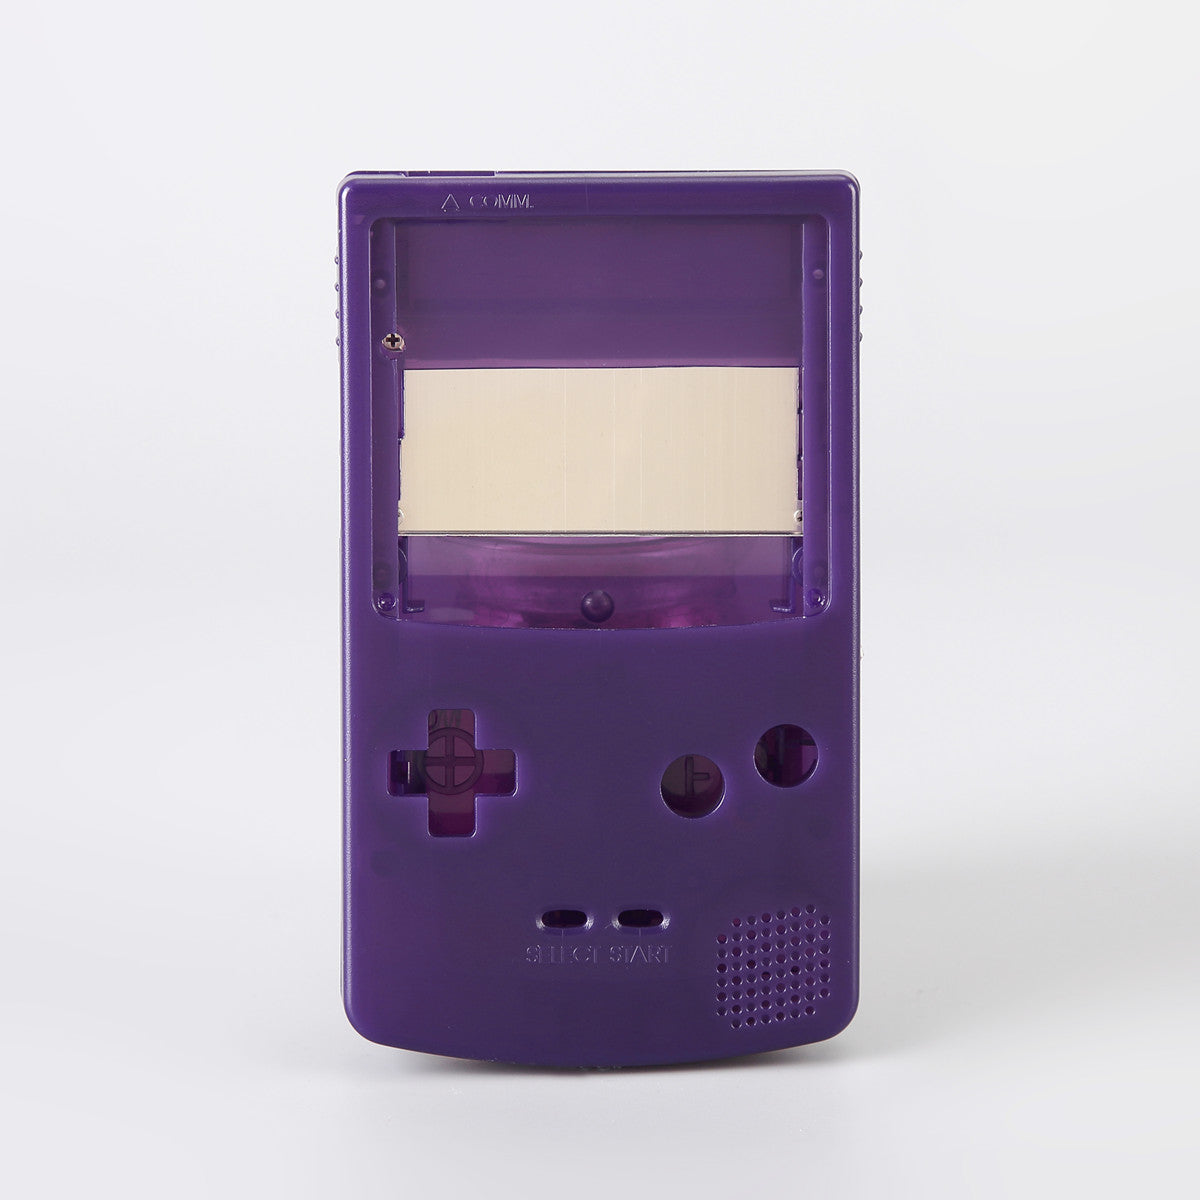 GameBoy Color Replacement Shell Housing IPS Ready Q5 2.0 V2 V3